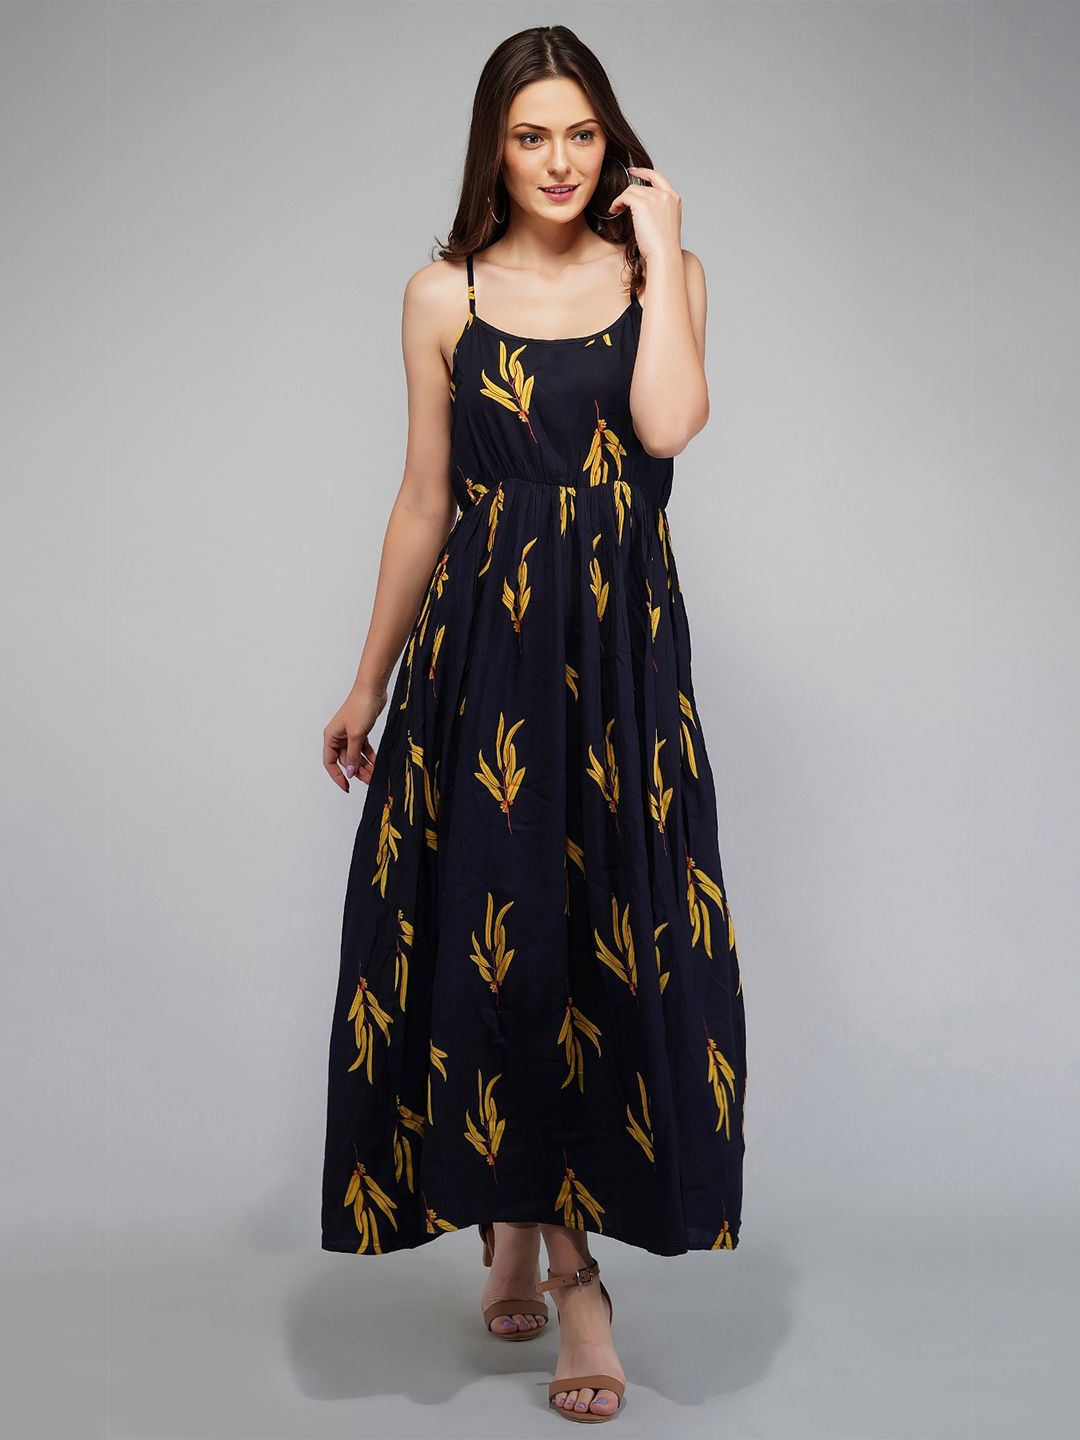 METRO-FASHION Floral A-Line Maxi Dress Price in India